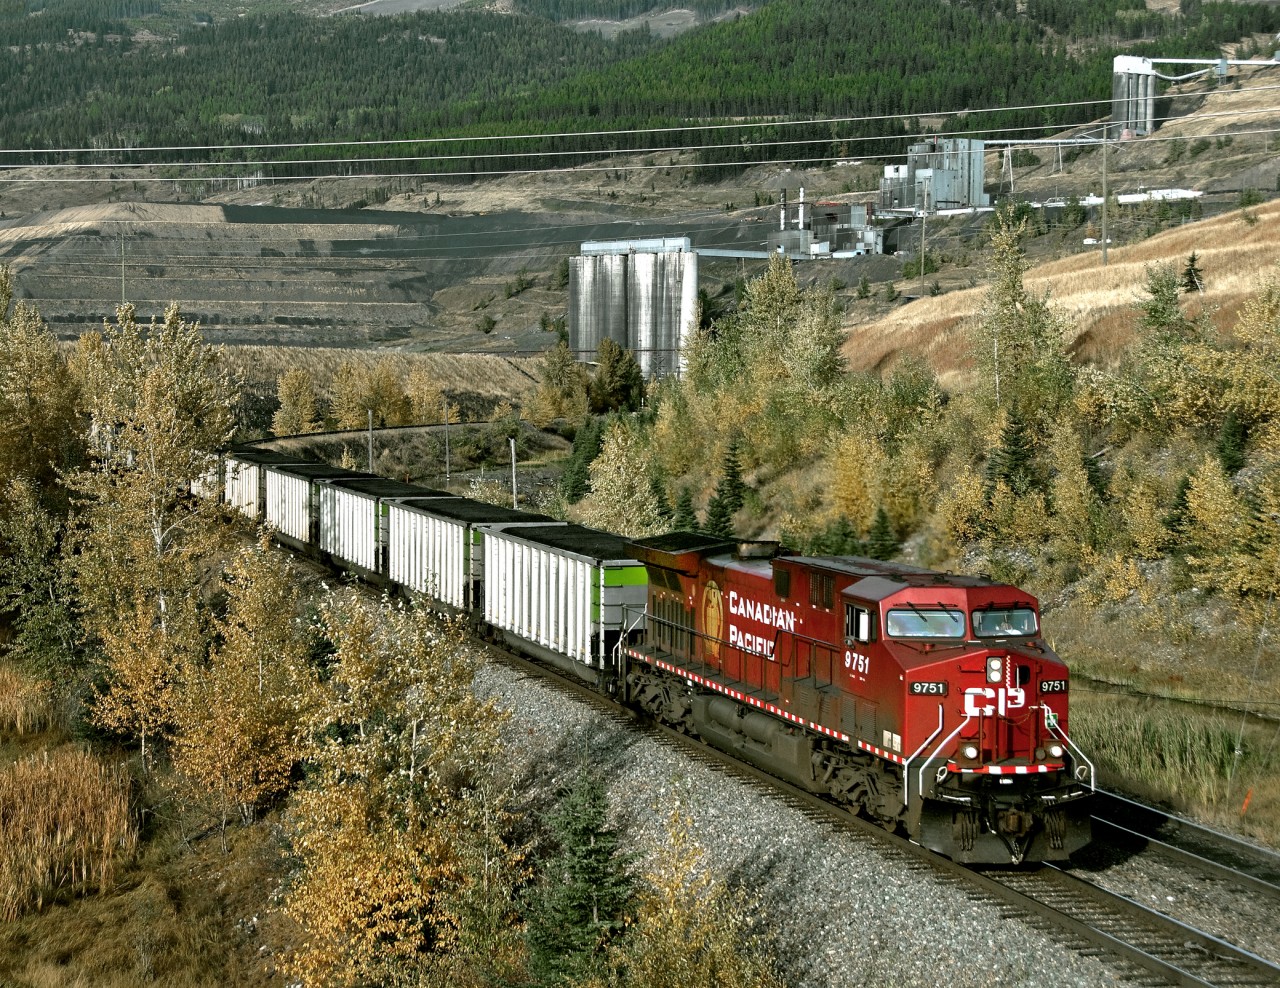 Coal loads from Fording loadout pass the silos at Elkview just north of the junction with the Crownest line at Sparwood